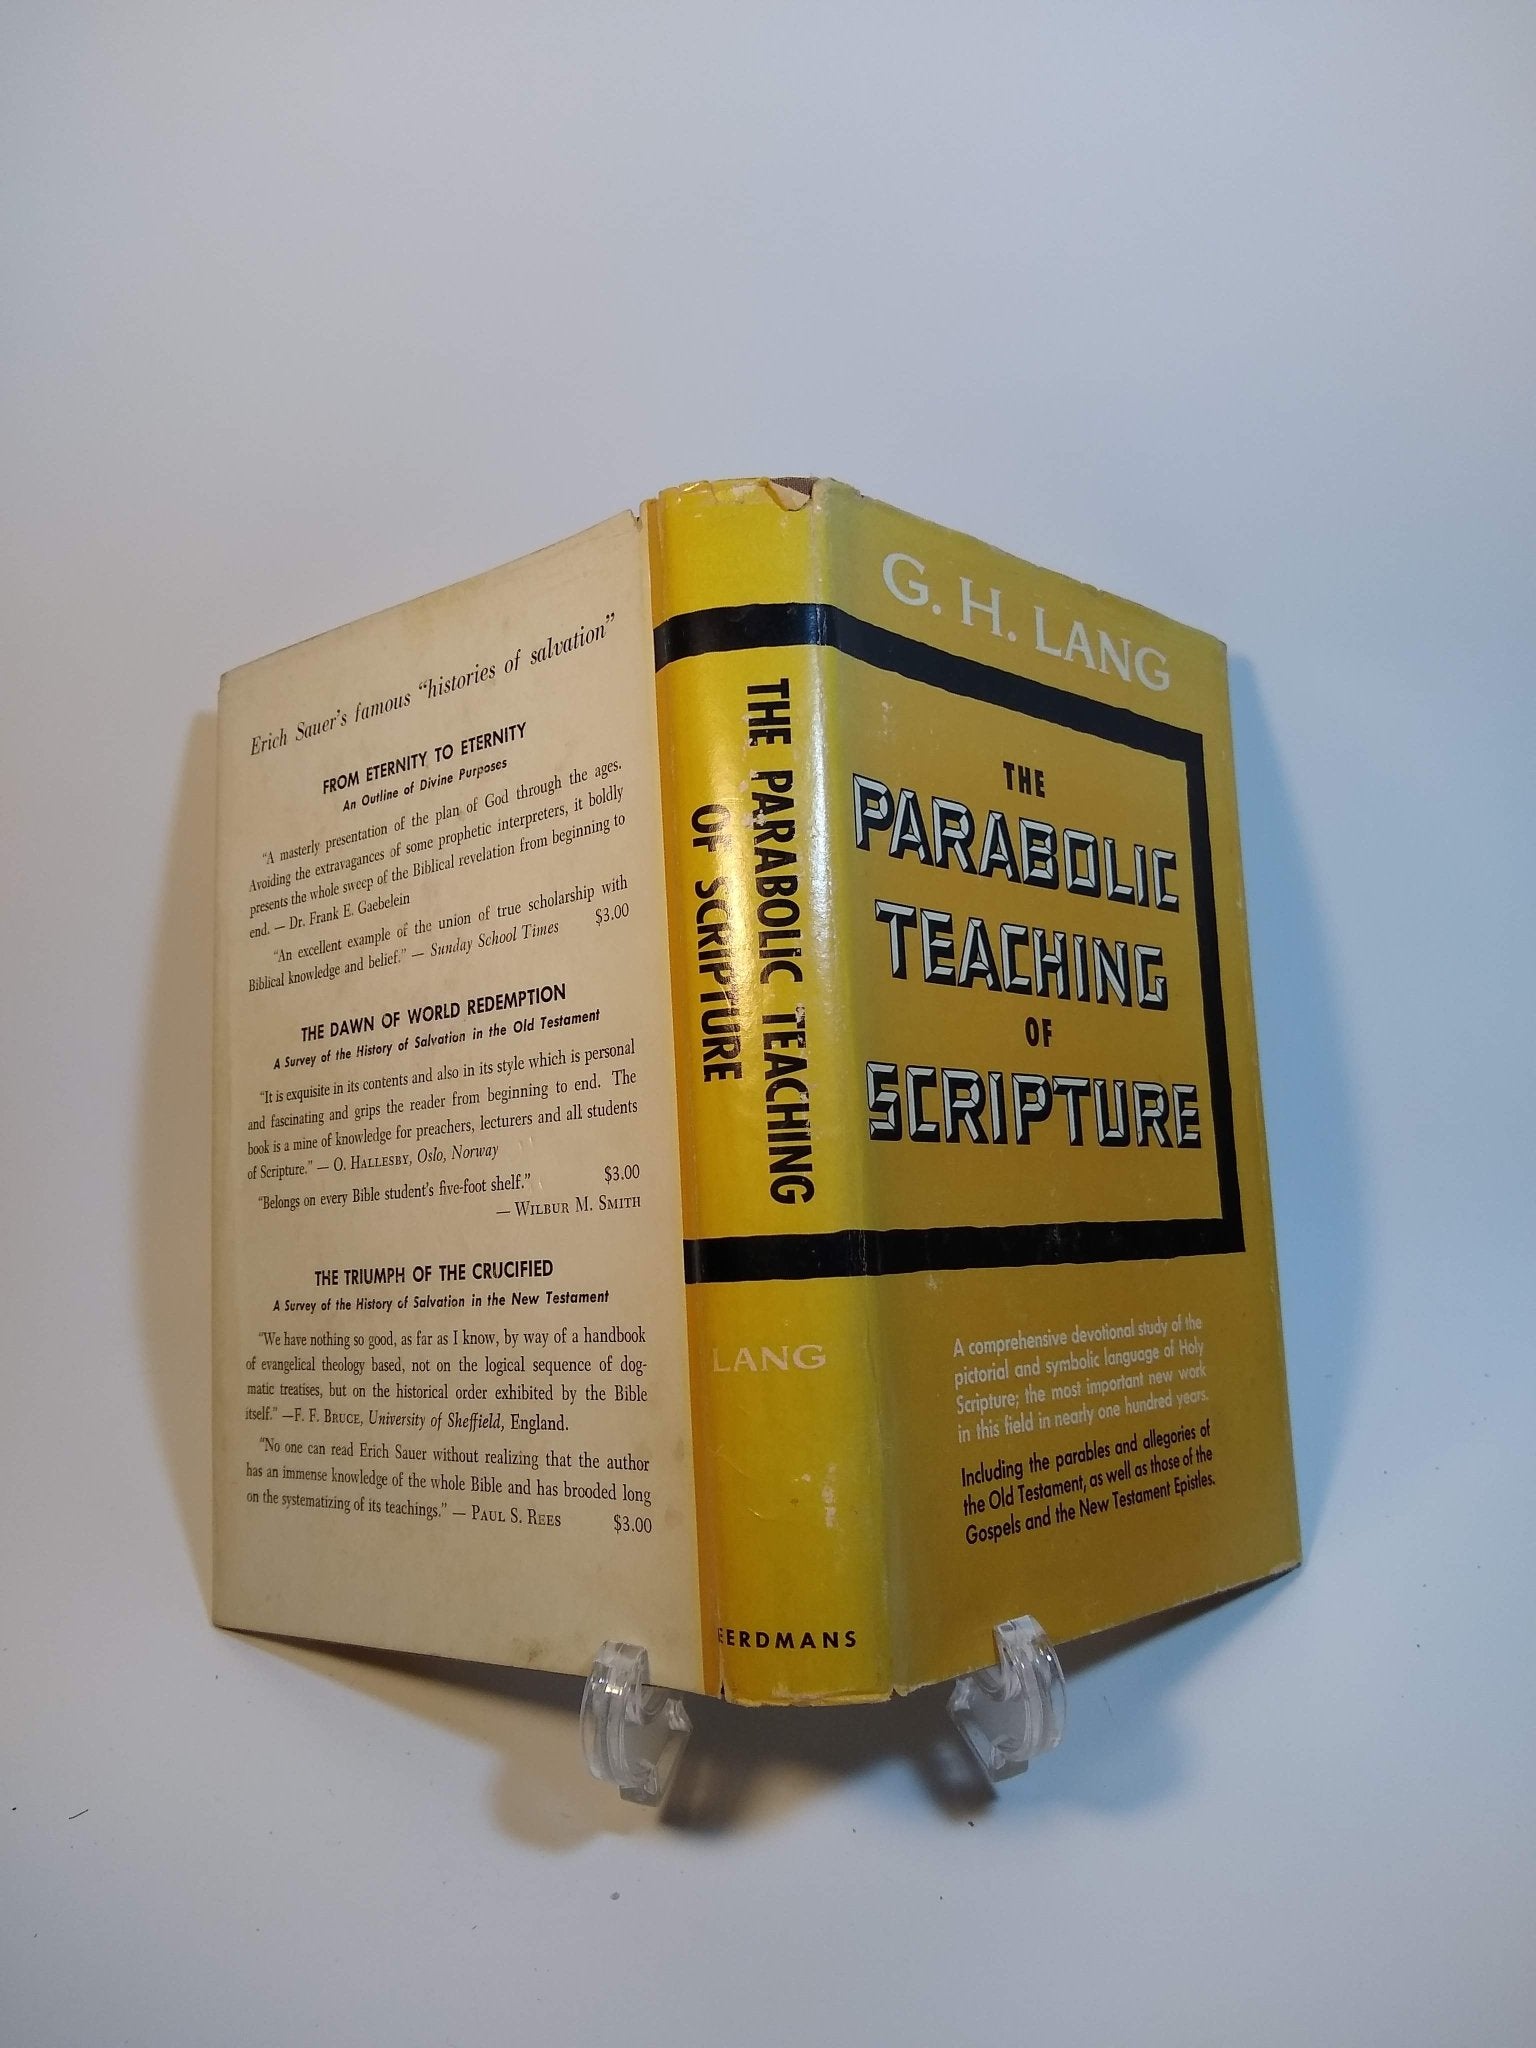 The Parabolic Teaching of Scripture - [ash-ling] Booksellers